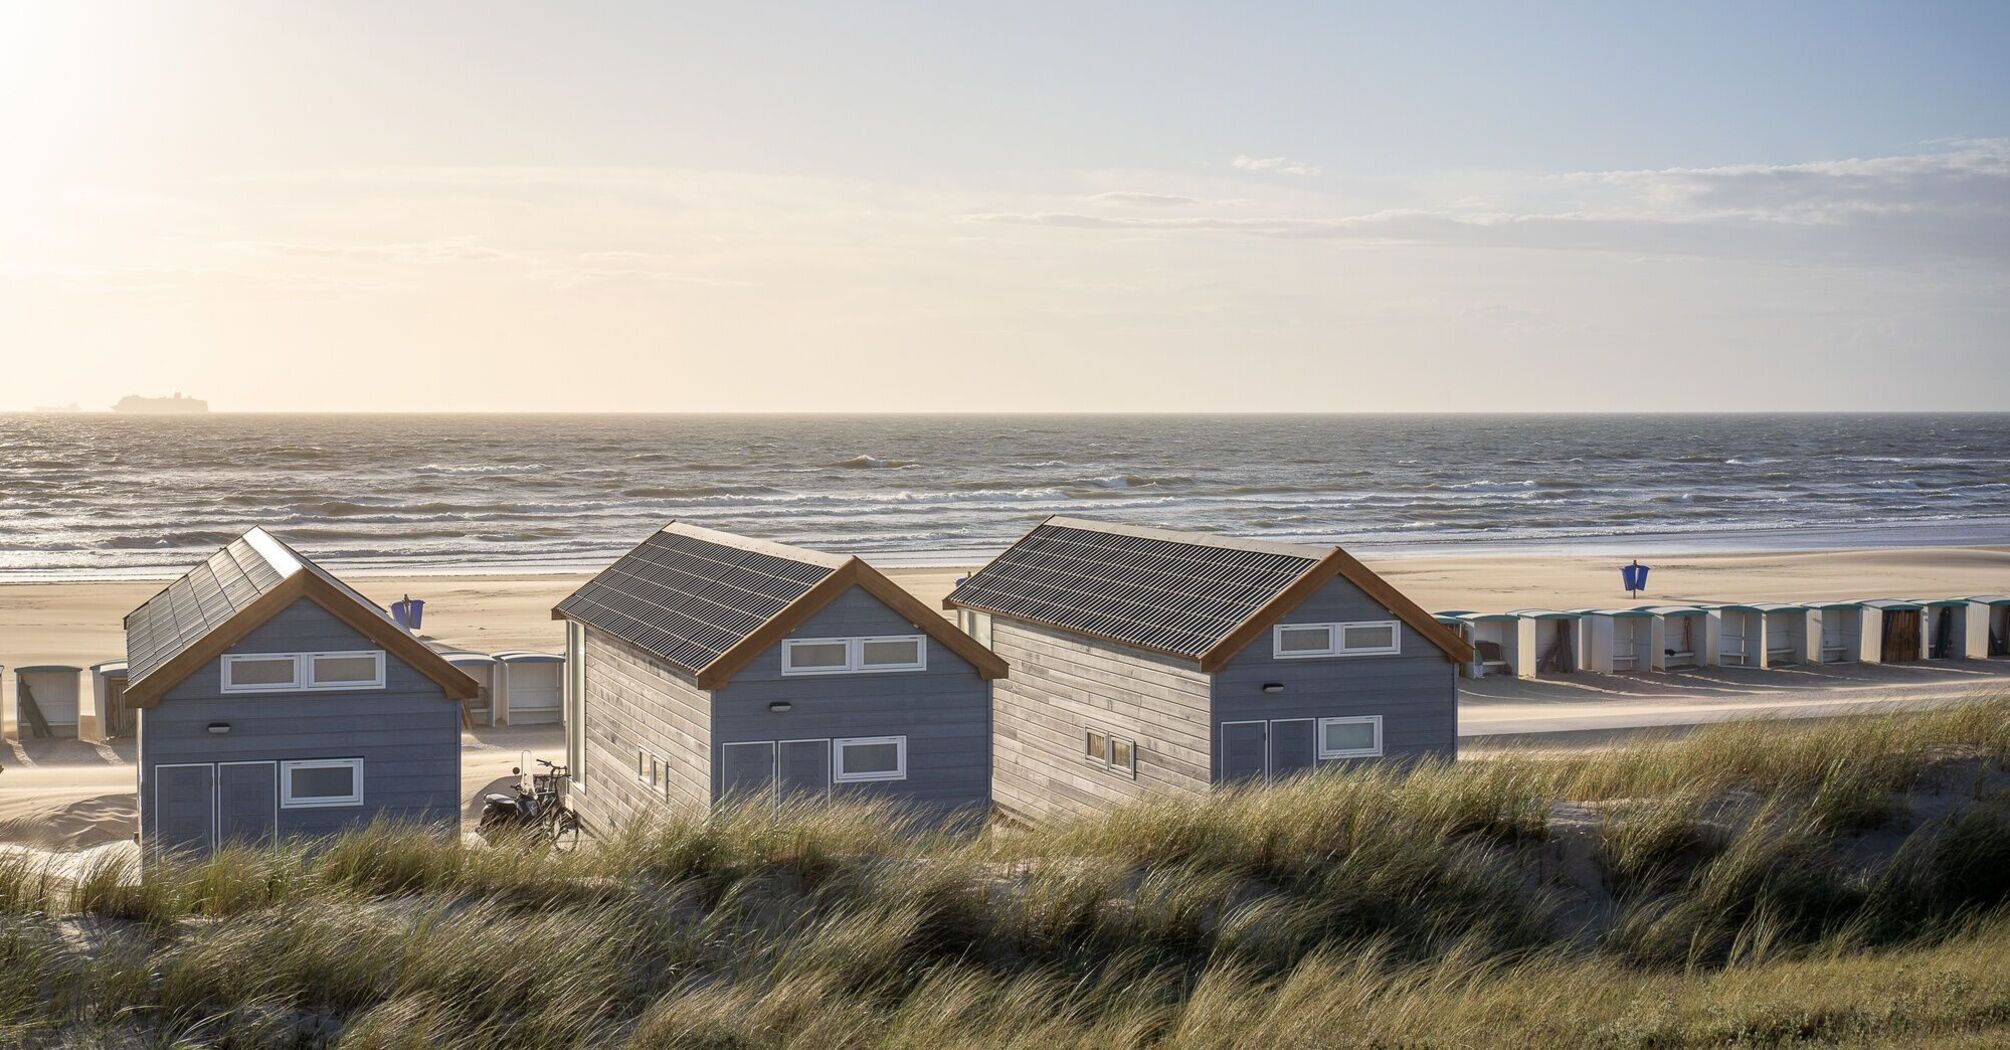 A heavenly journey: 4 places with wonderful beaches and cottages for the whole family